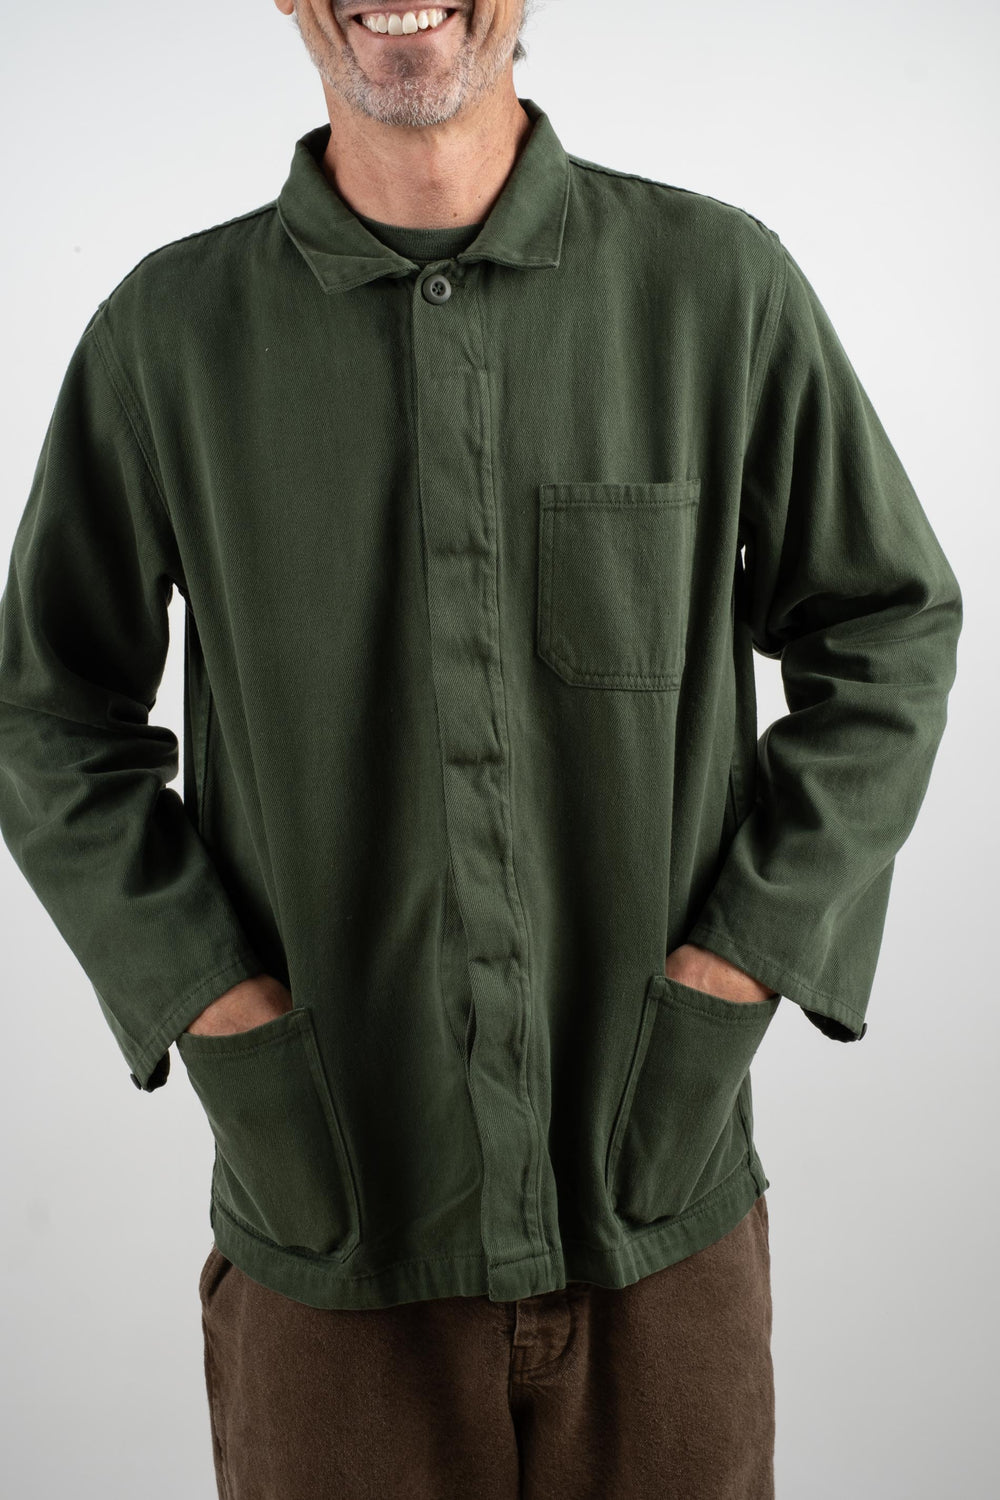 Olympic Jacket In Hunter Green